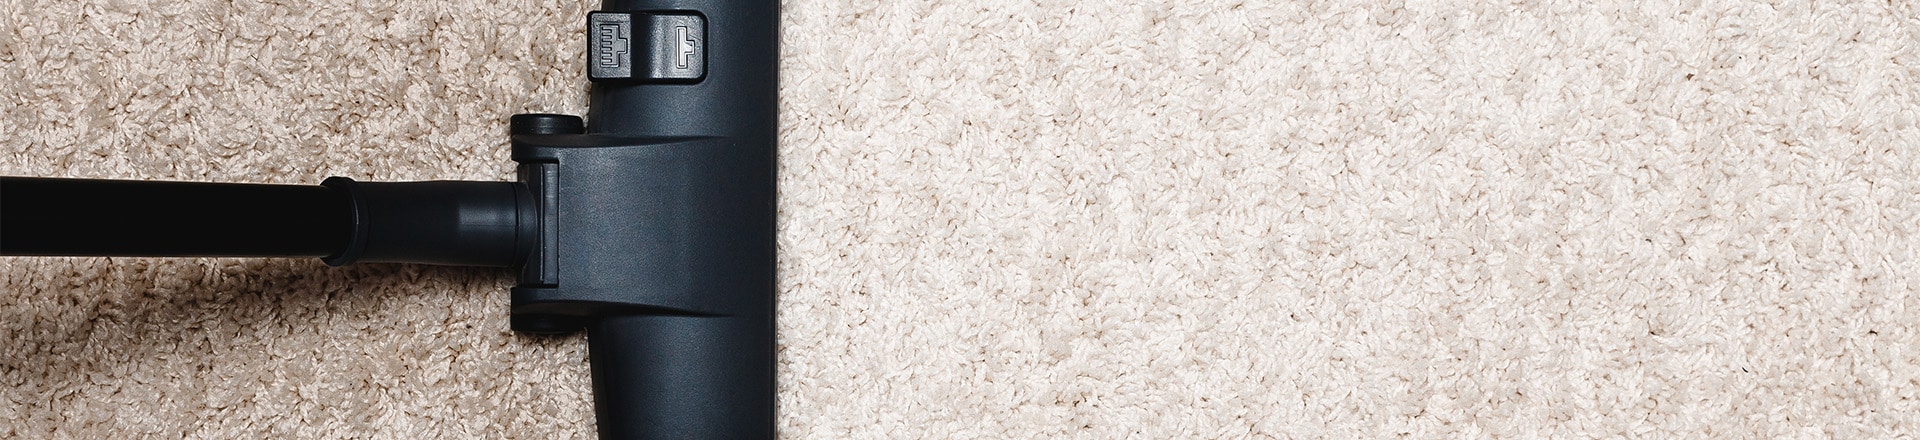 Ensuring a Safe, Clean Home: Colossal Carpet Care's Eco-Friendly Carpet Cleaning Solutions